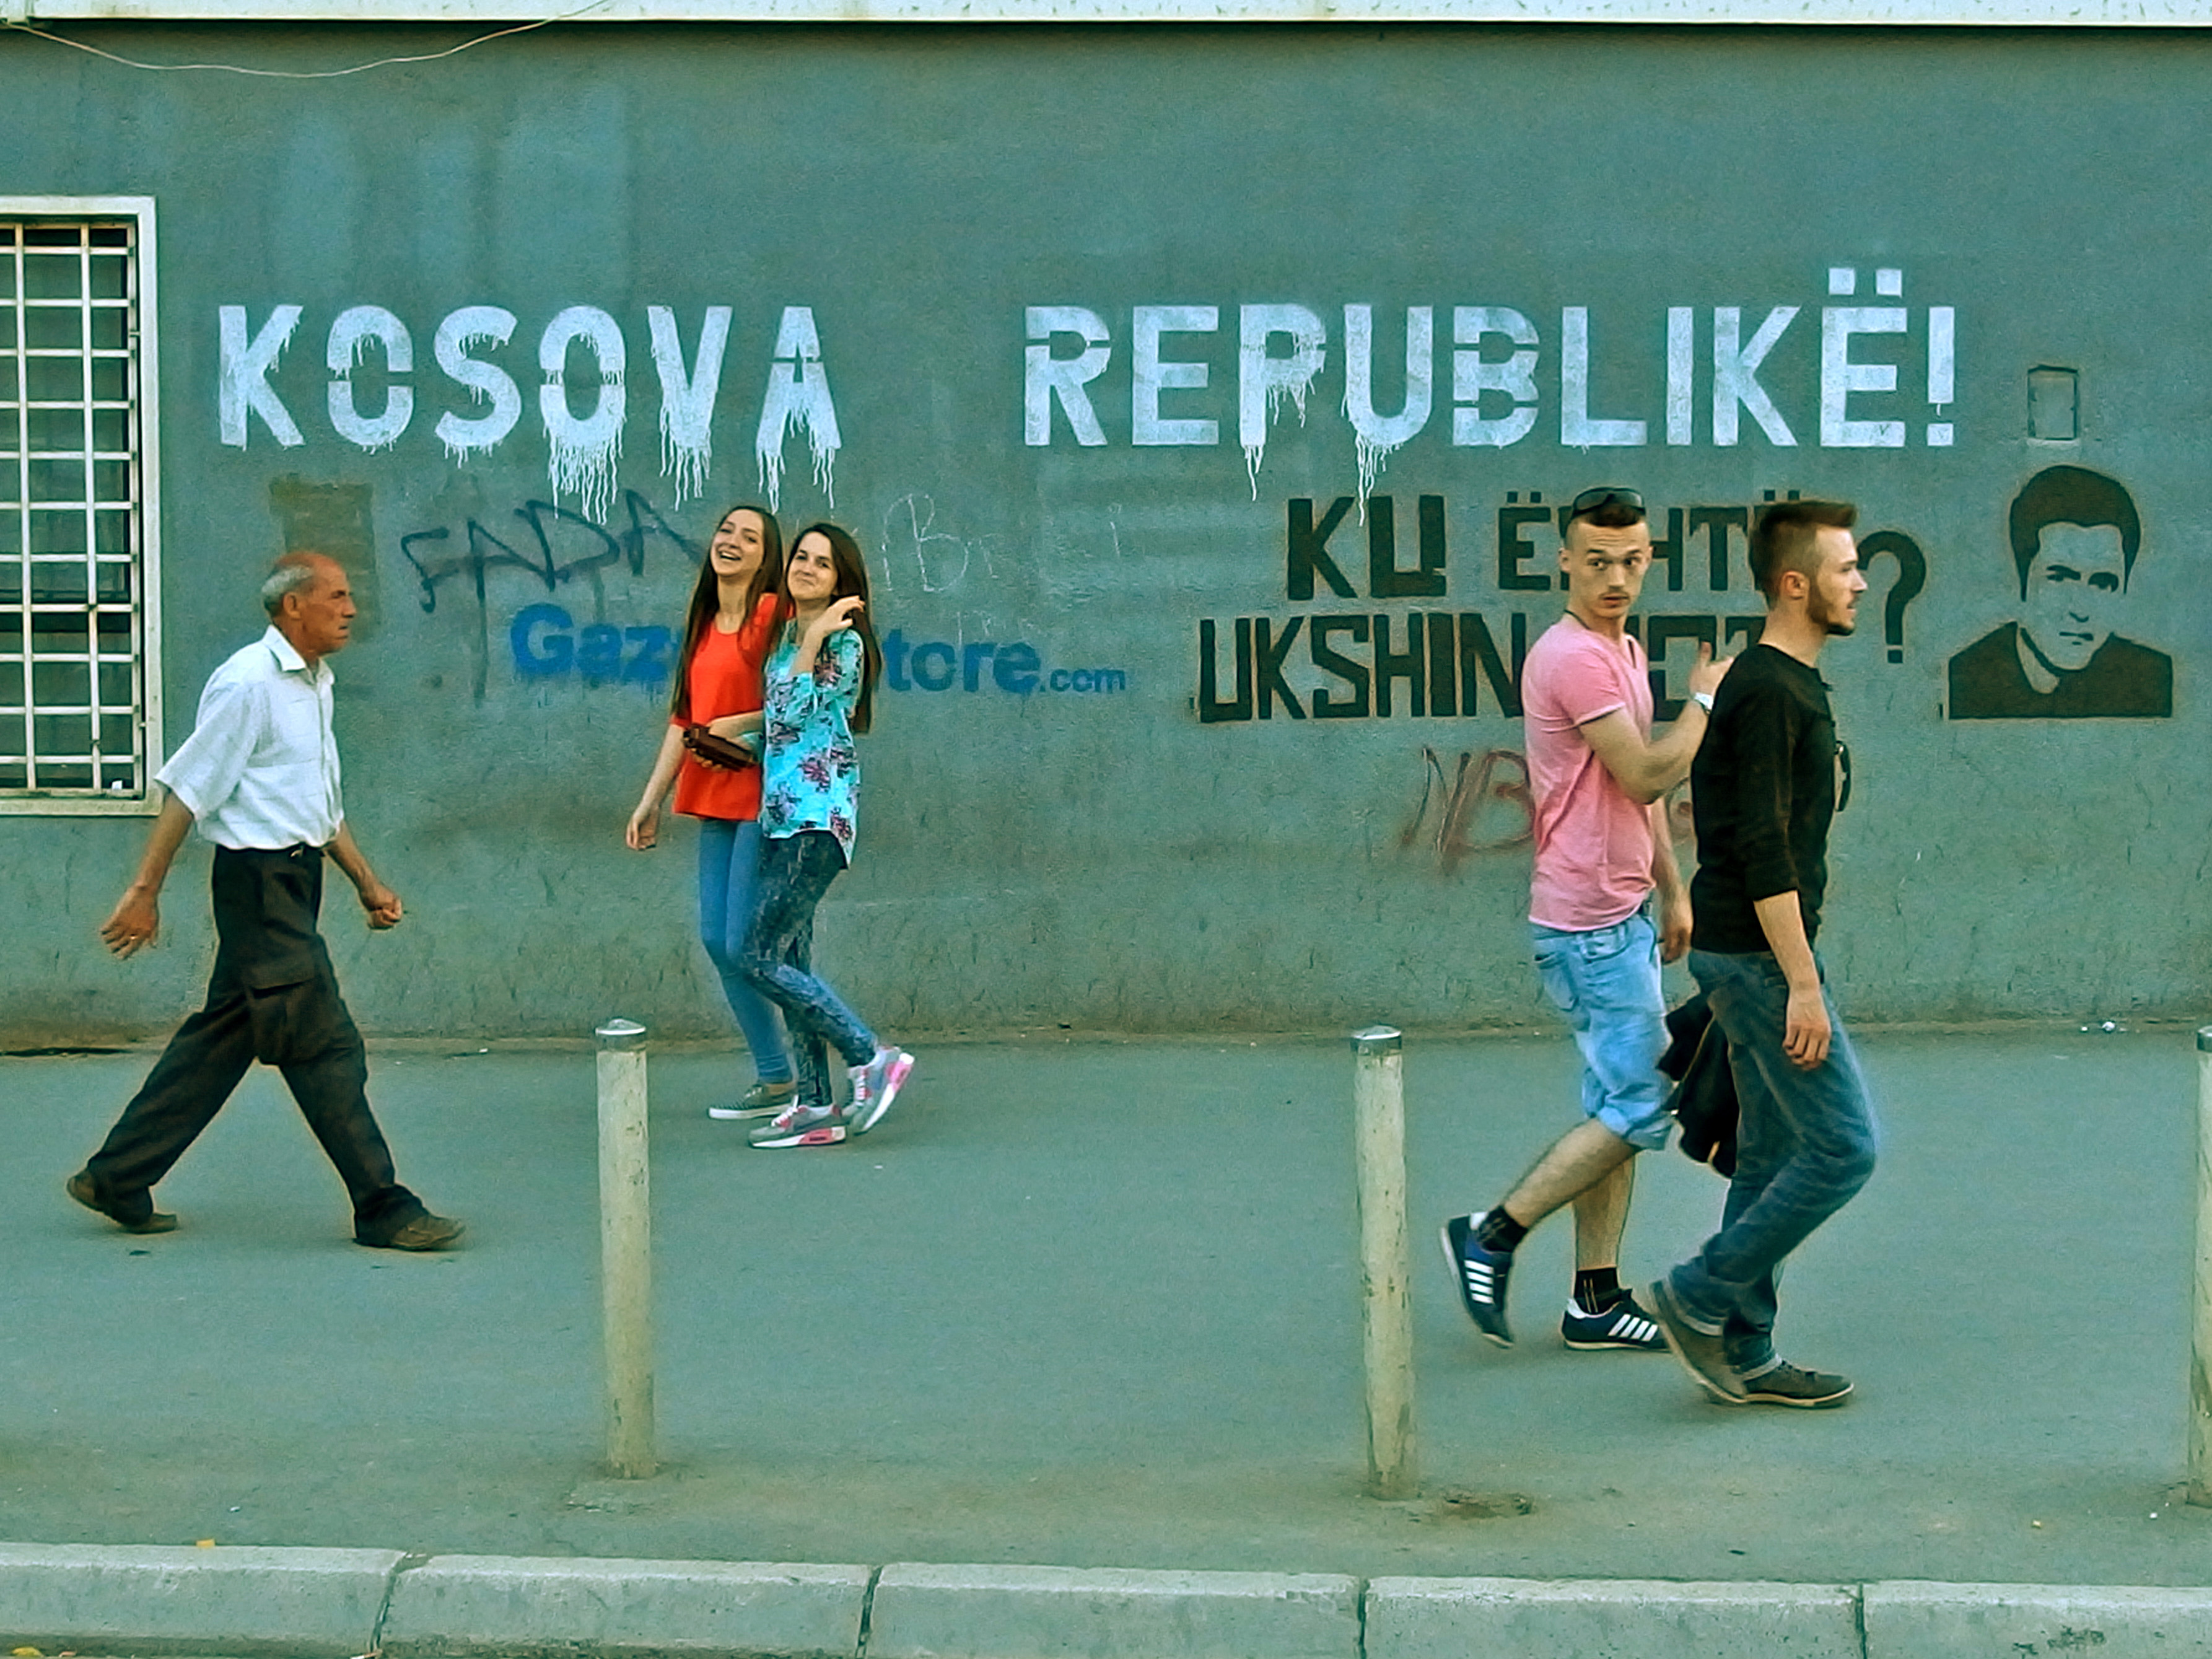 People on a pavement in Pristina, the capital of Kosovo, in the background you can see graffiti.